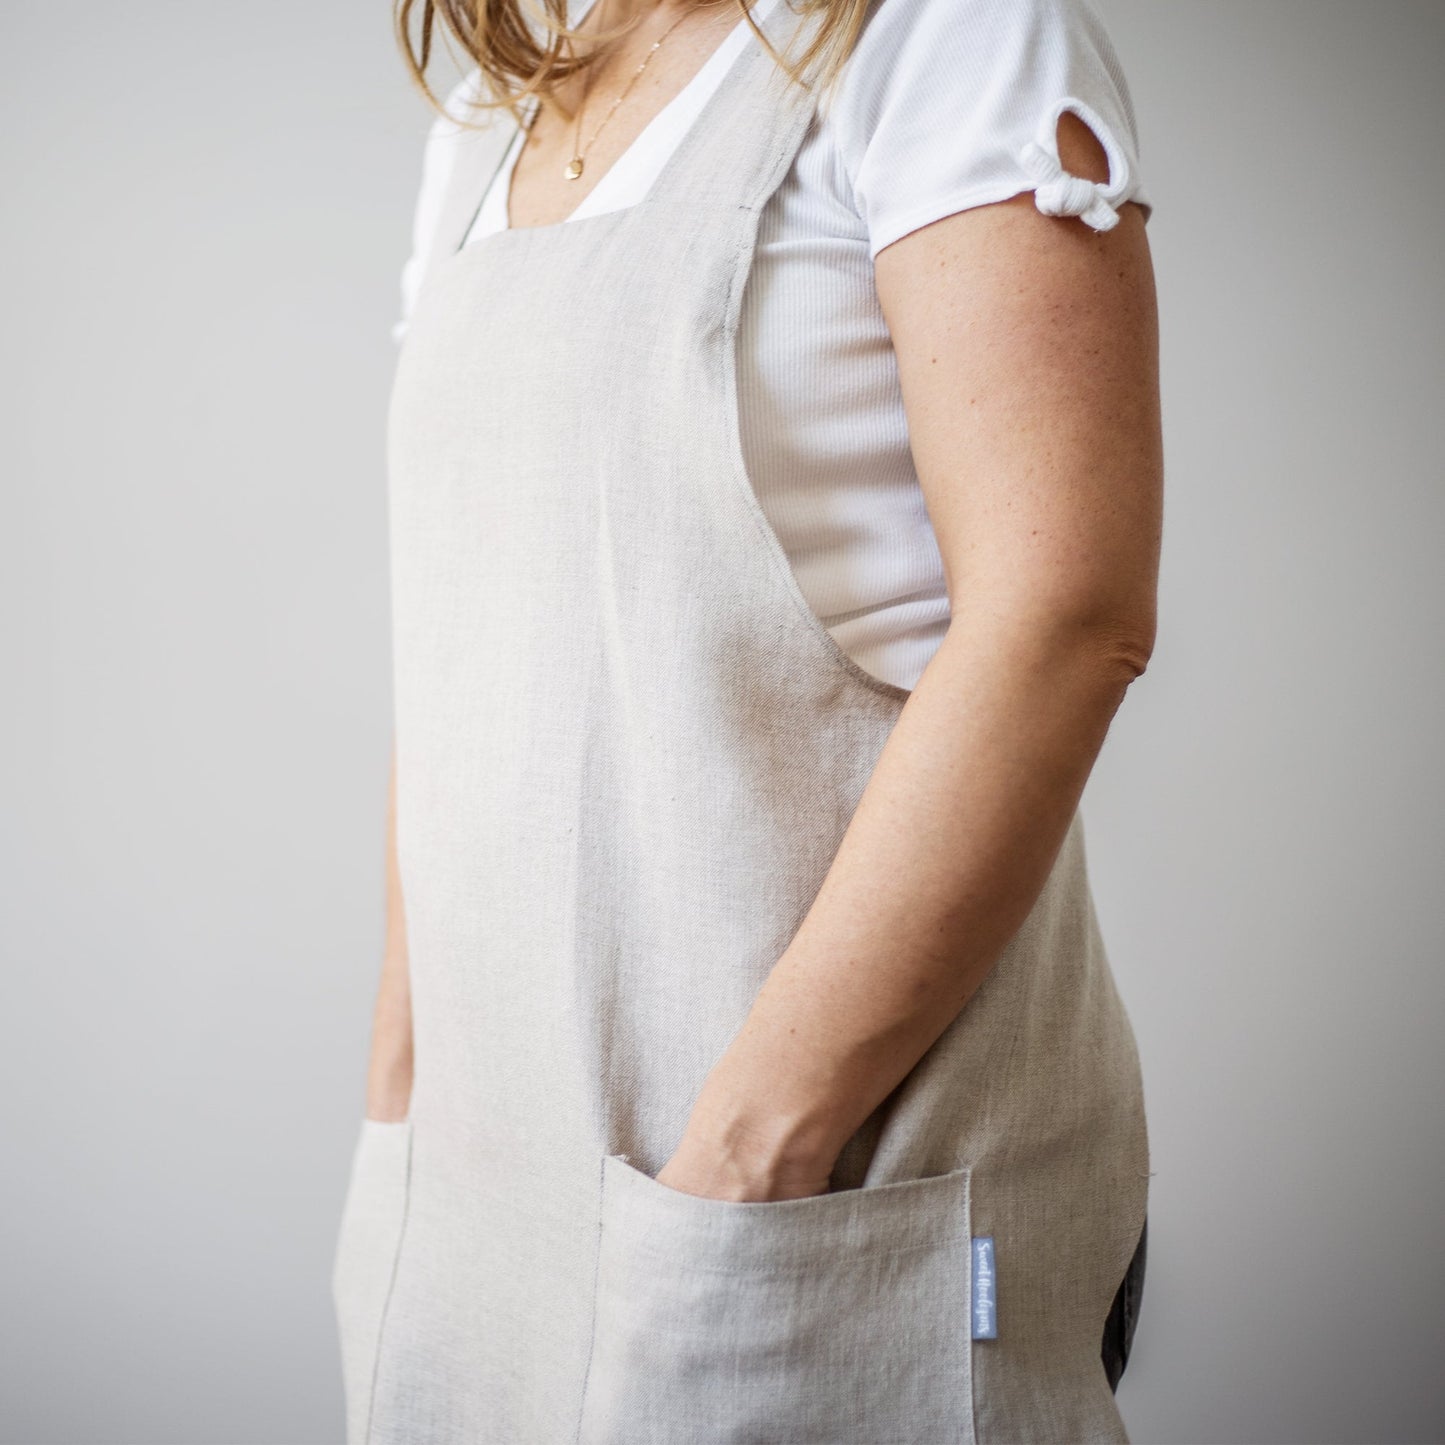 Load image into Gallery viewer, Linen Pinafore Apron | Cross Back Linen Apron | Japanese Style Apron | No Ties Linen Apron | Long Linen Apron | No Ties Apron | Linen Apron
